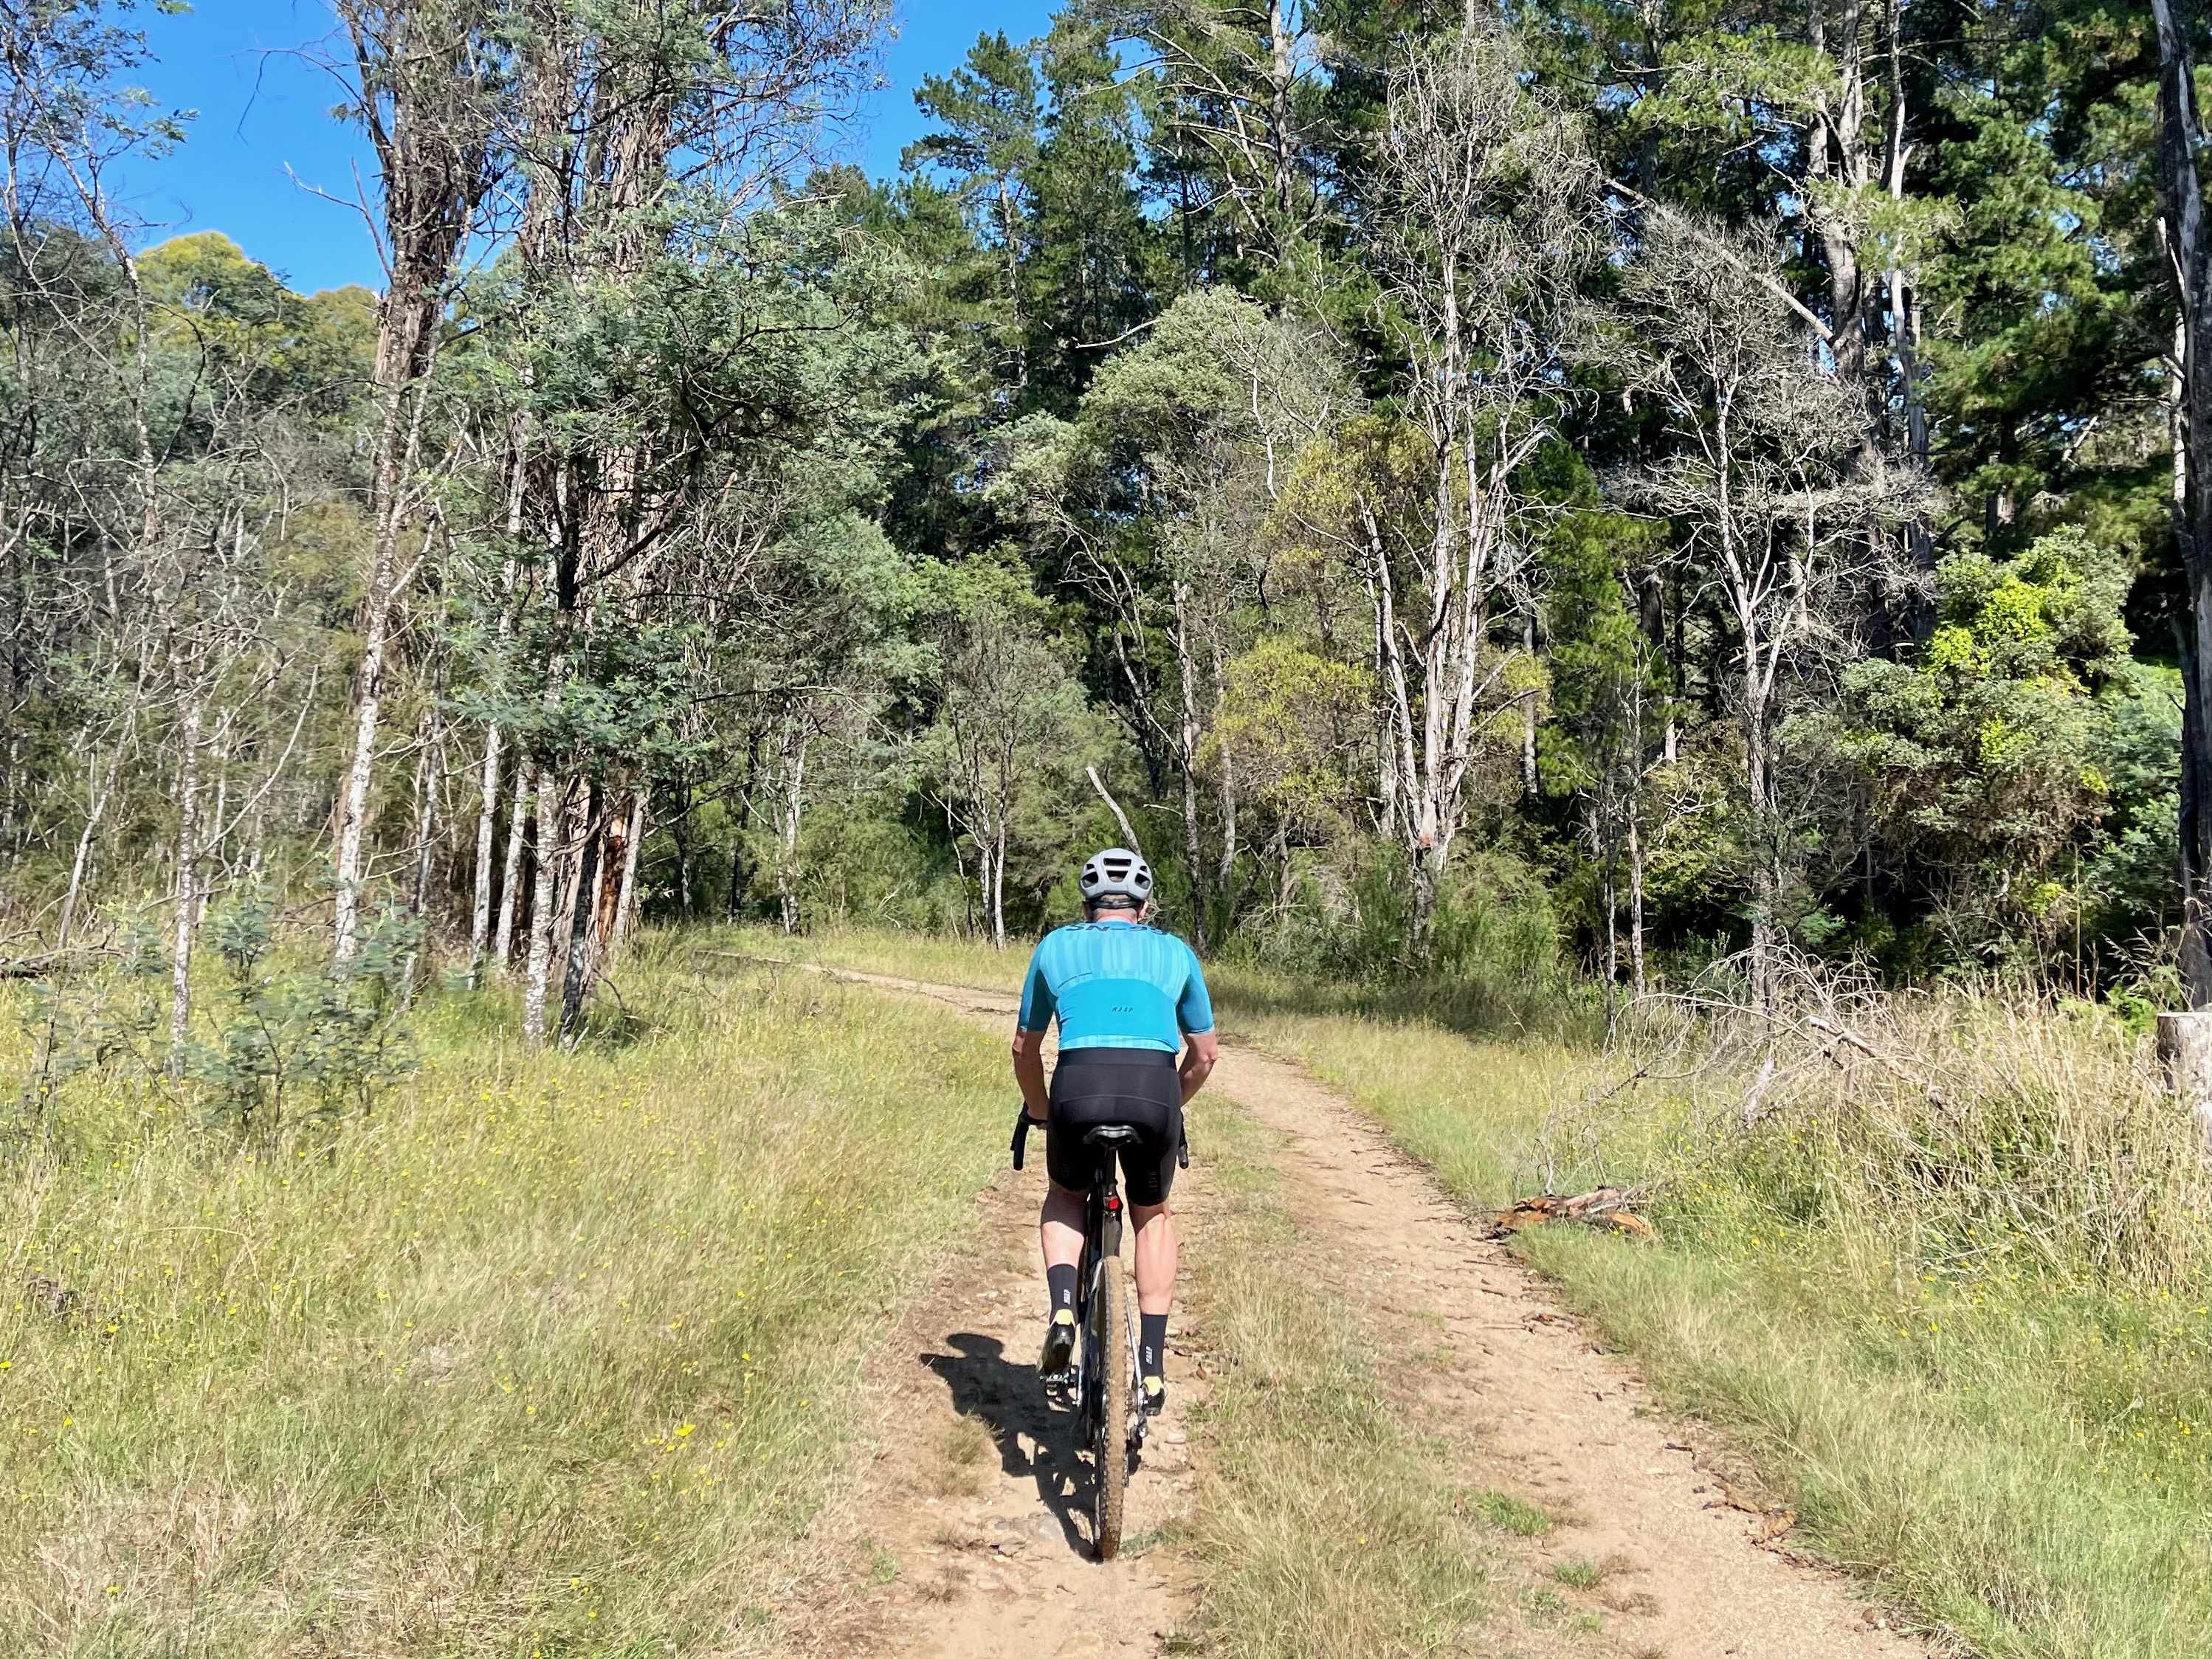 Cyclist riding along a smooth dirt double track through open native bushland and native forest in the background